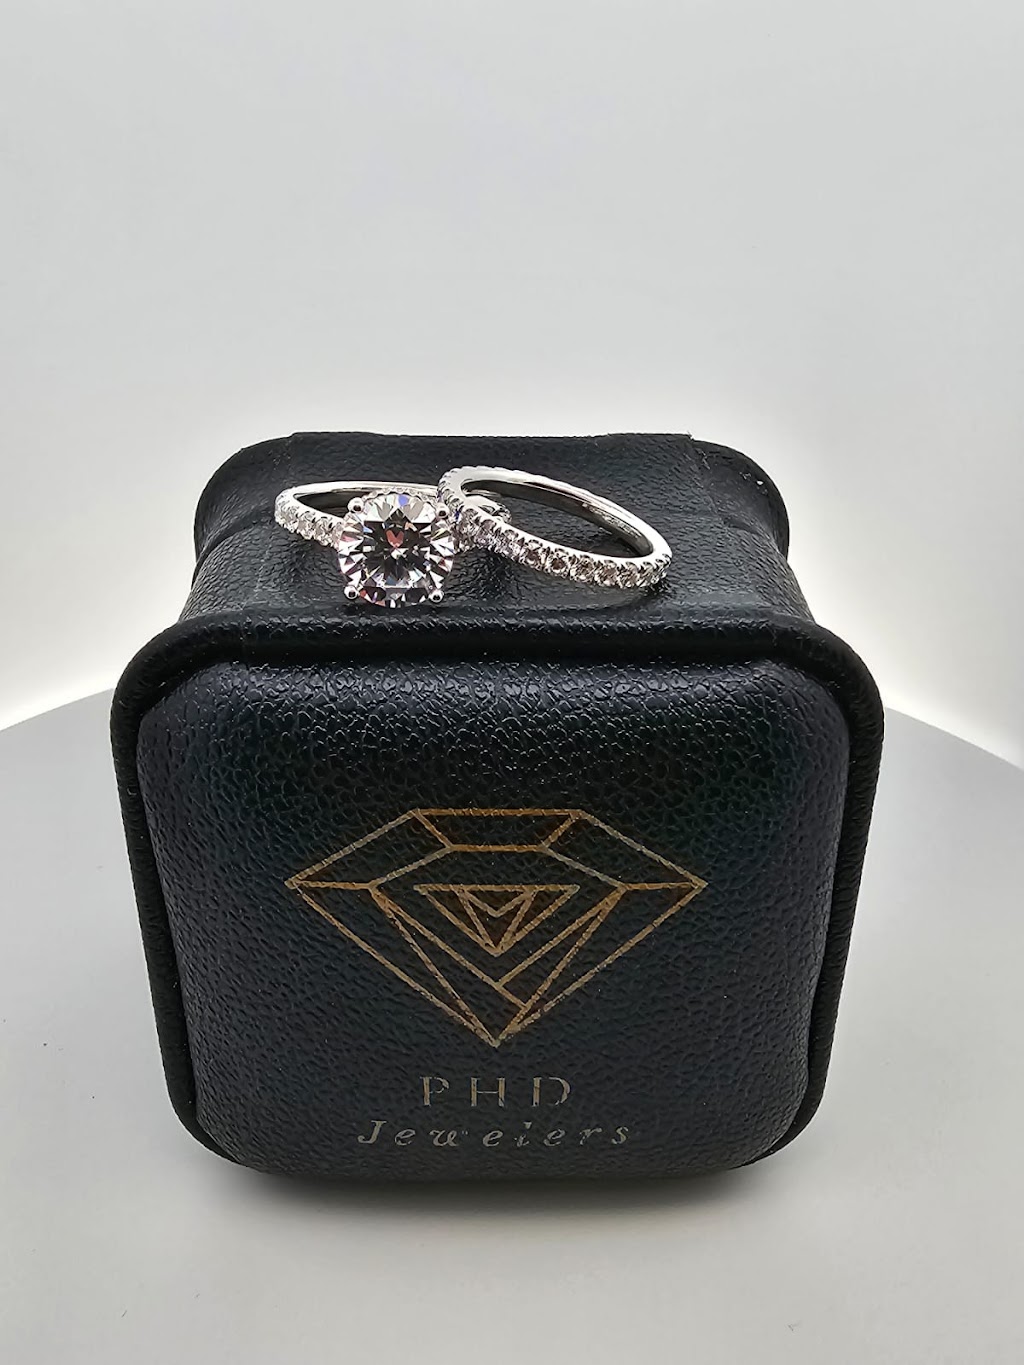 PHD Jewelers | 980 Harvest Dr Suite 200, Blue Bell, PA 19422 | Phone: (610) 679-9191